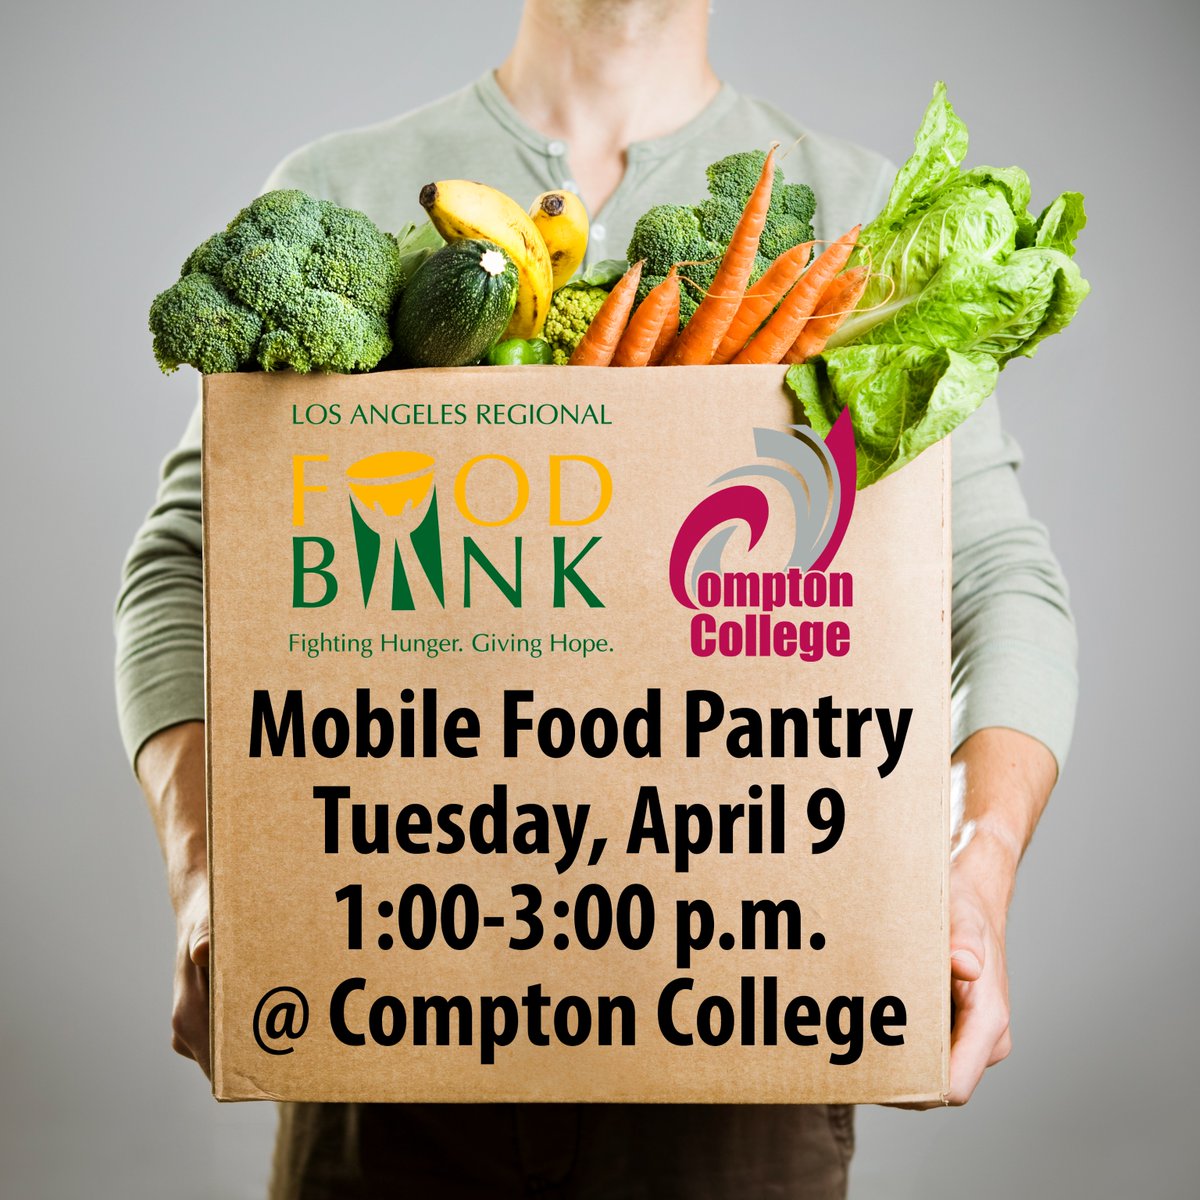 Mobile Food Pantry TOMORROW! Hosted by the @lafoodbank the Mobile Food Pantry is open to the public, enter Compton College from Greenleaf Blvd. Please share this information with your family & friends!